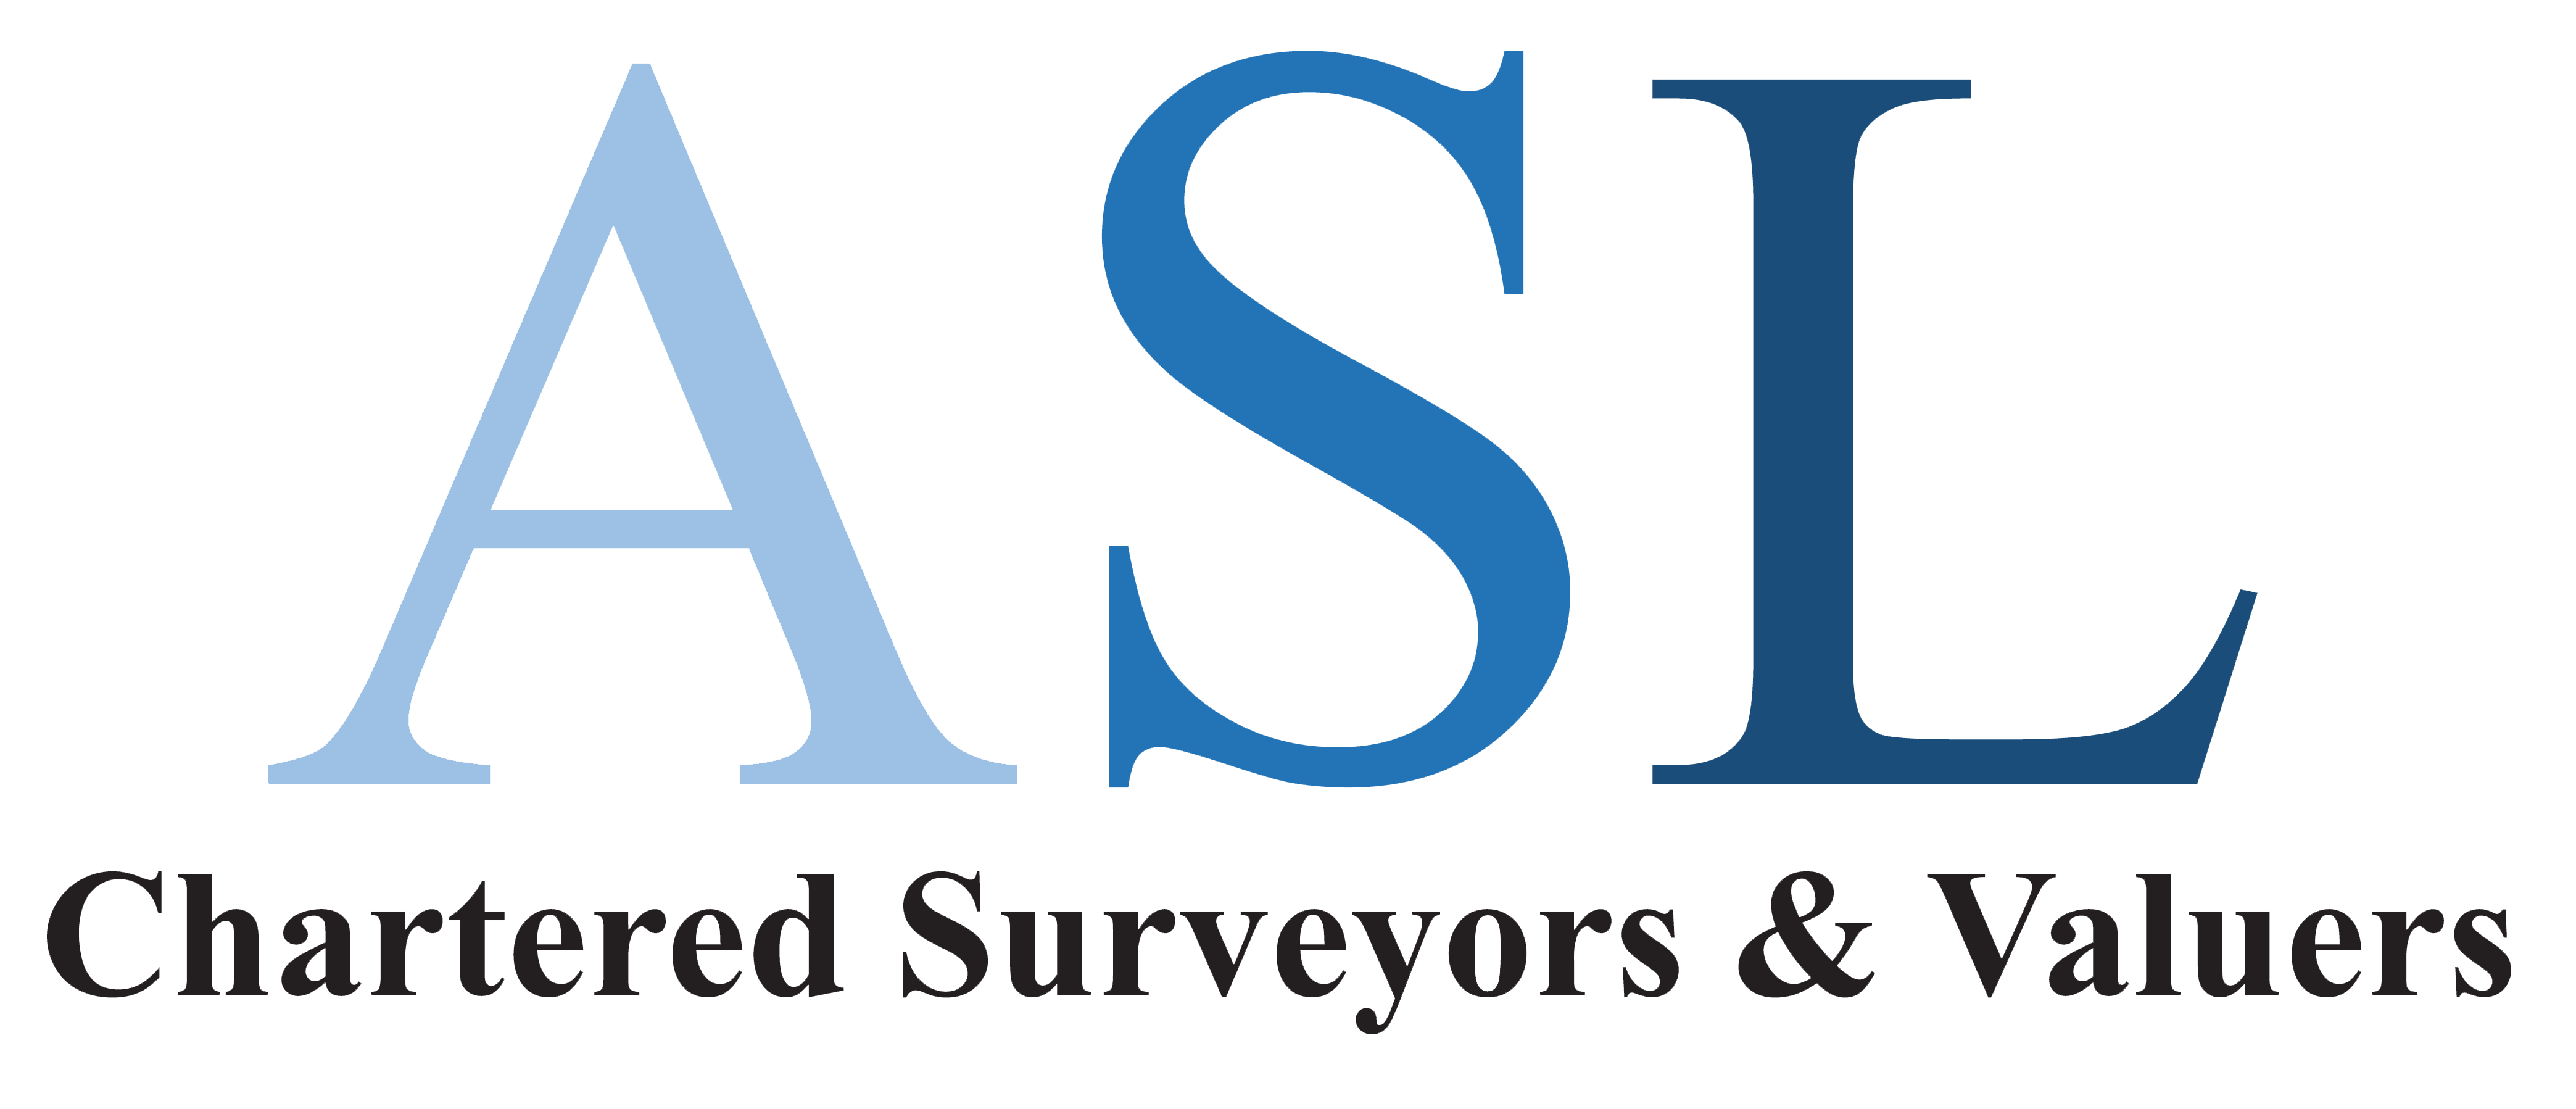 ASL,Ashall,ASL Chartered Surveyors,Chartered,Surveyors,Chartered Surveyors,Survey,Surveys,Assessment,Home Surveys,Commercial,Commercial Surveys,Home,Lease Renewals,Reviews,Retrofit,Assessments,Chartered,RICS,services,